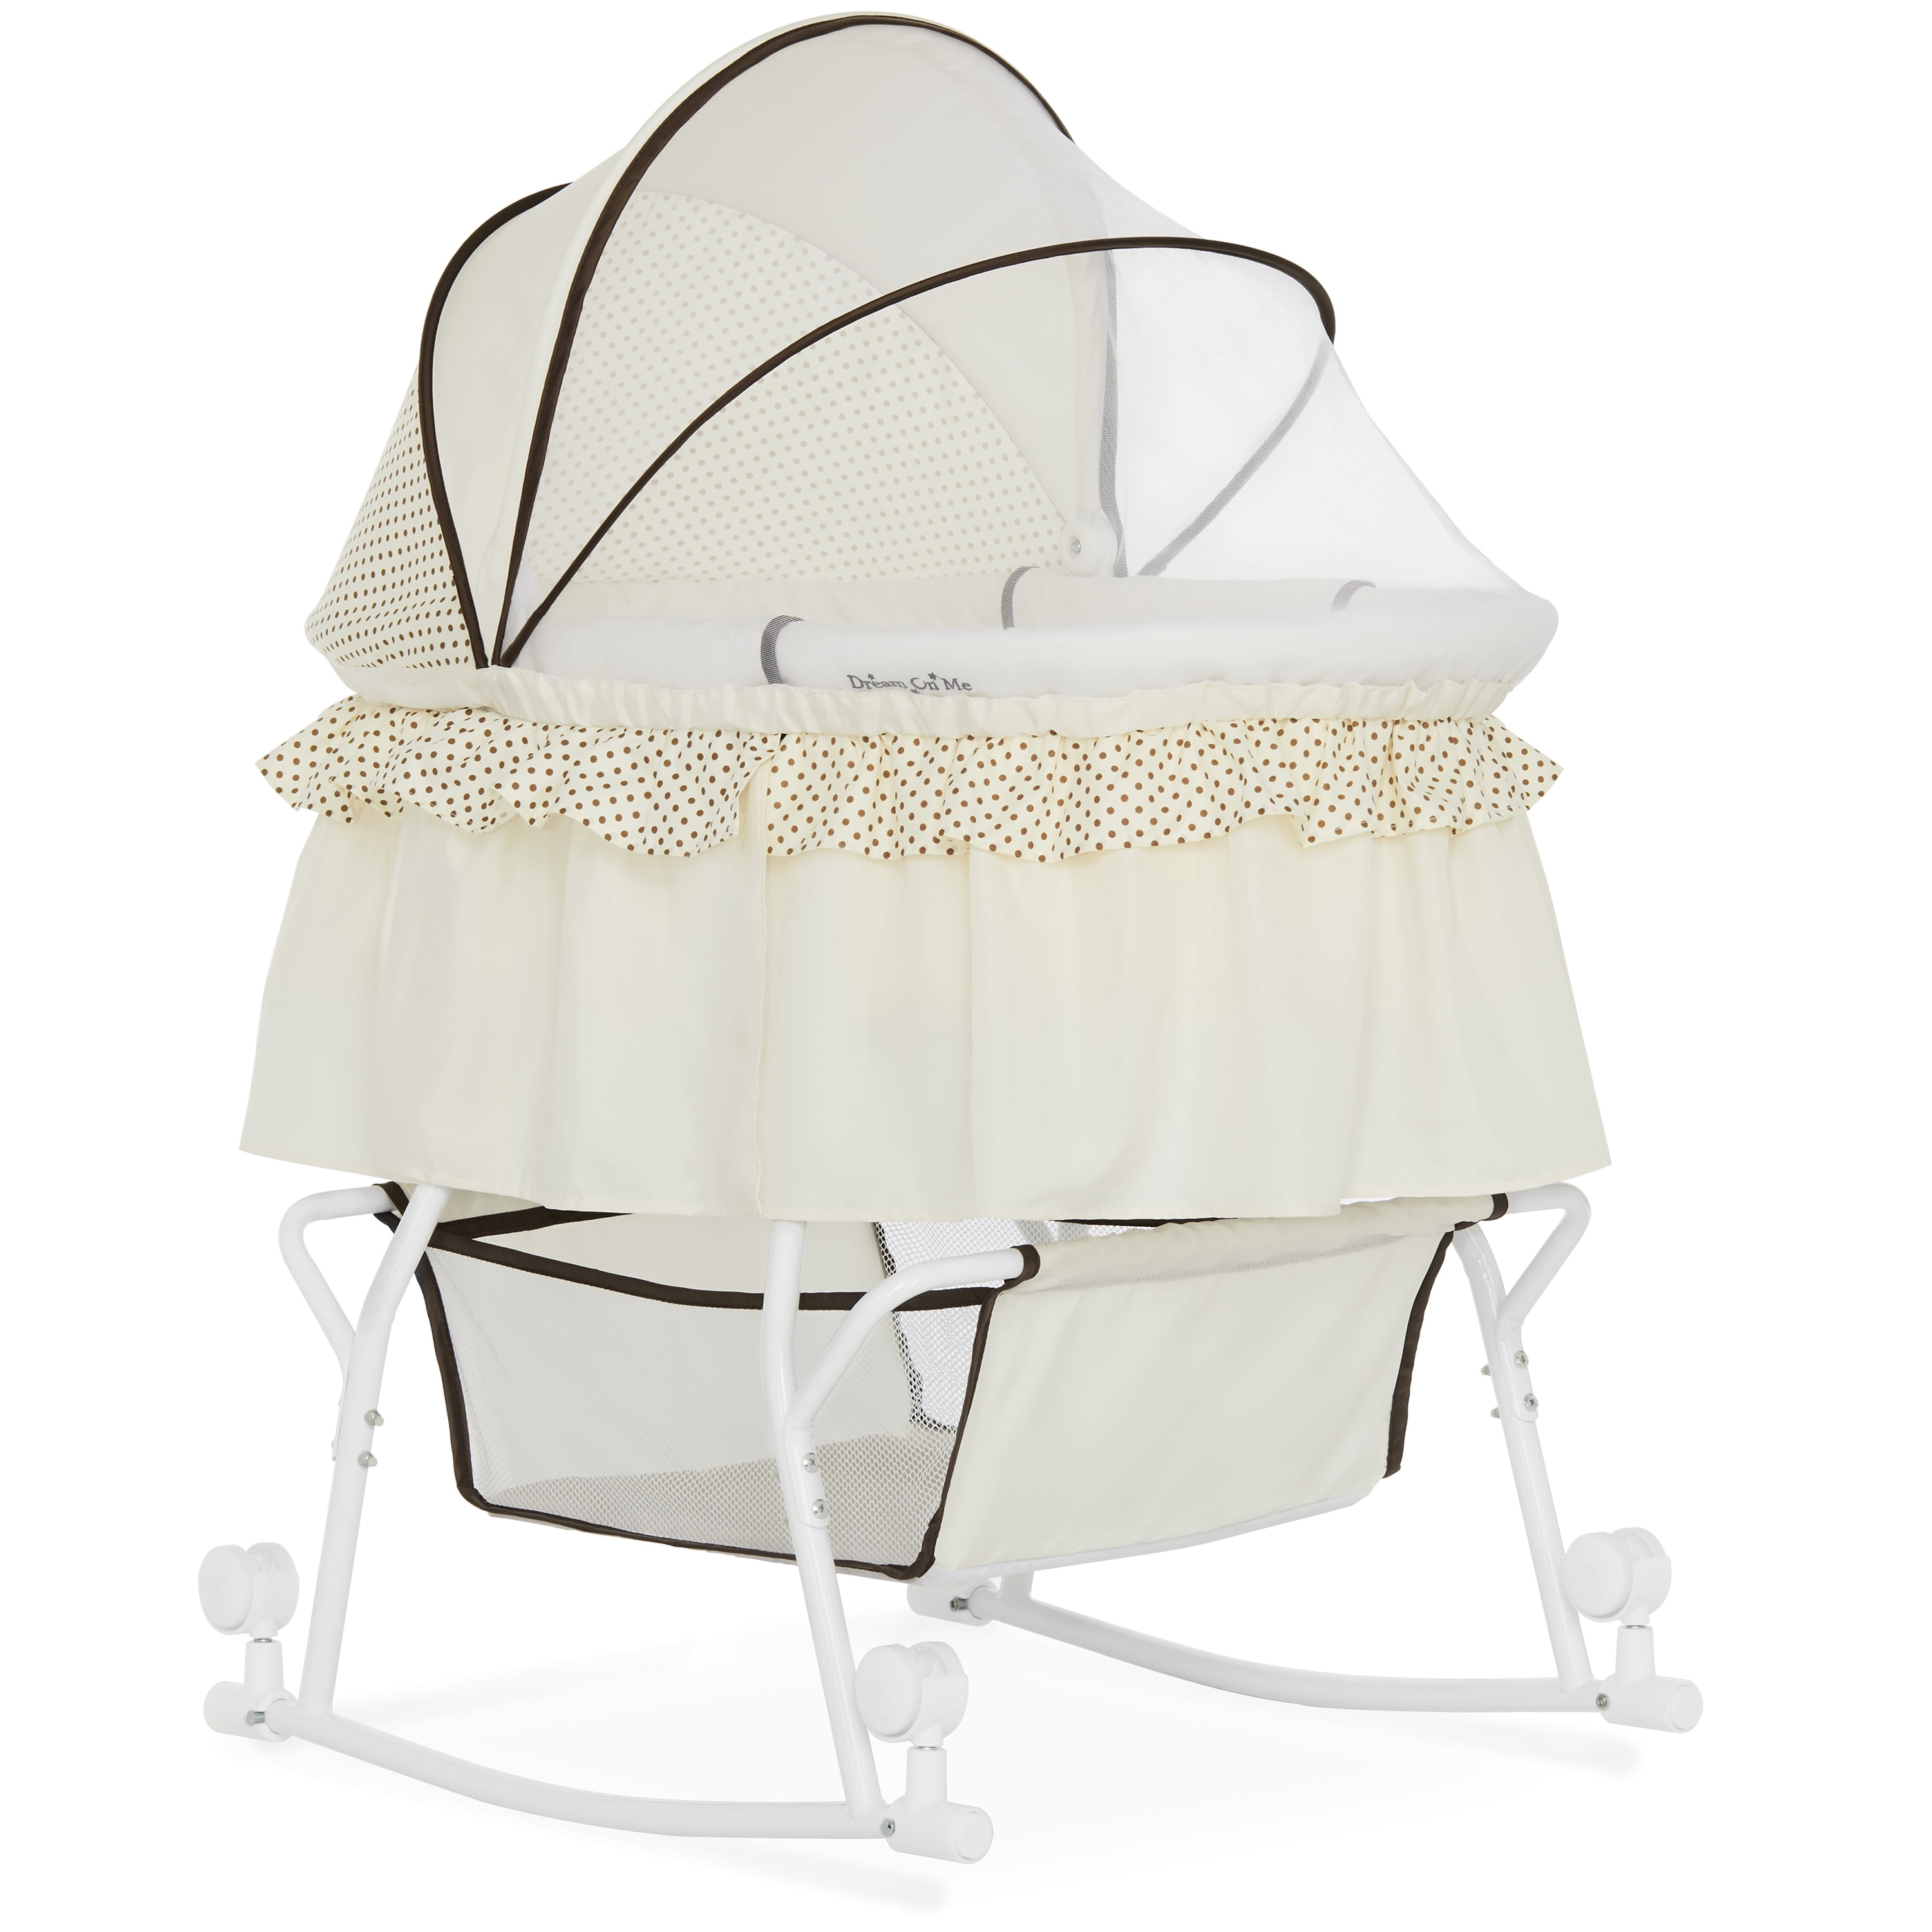 Dream On Me Lacy Portable 2-in-1 Bassinet & Cradle in Cream, Lightweight Baby Bassinet - image 1 of 27